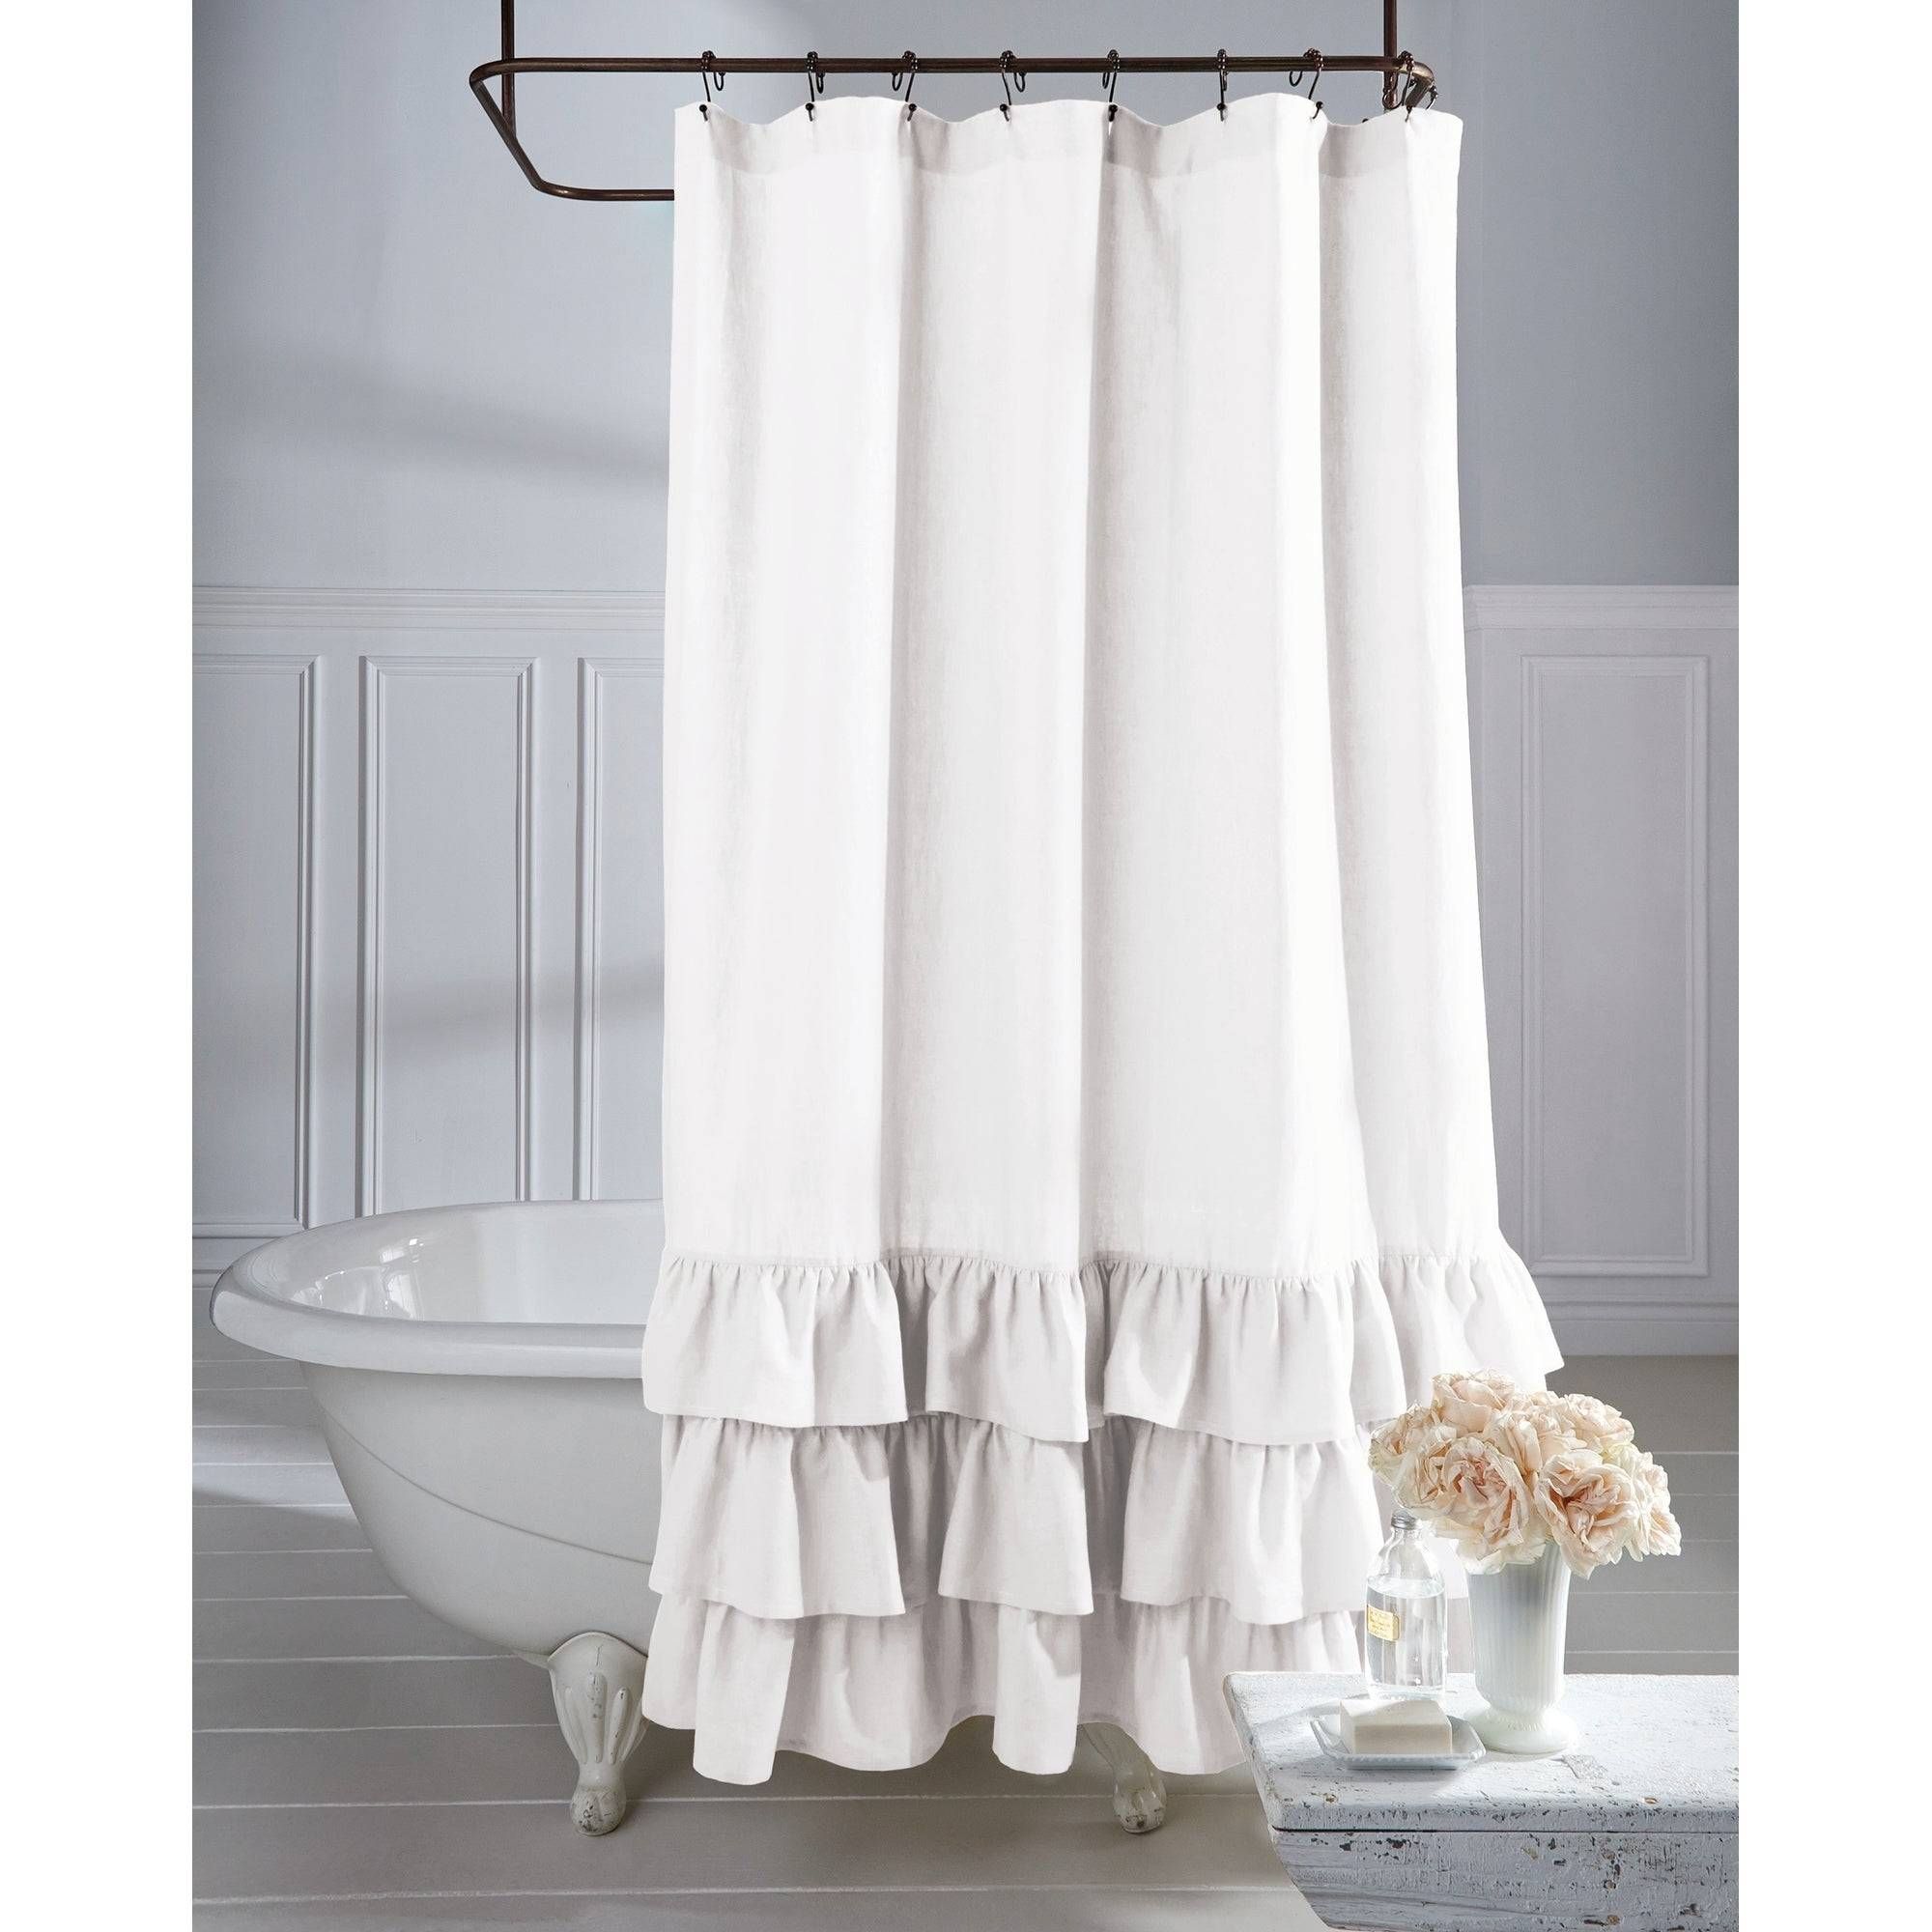 Fascinating Grey Ruffle Shower Curtain Farmhouse Linen Intended For Navy Vertical Ruffled Waterfall Valance And Curtain Tiers (View 10 of 20)